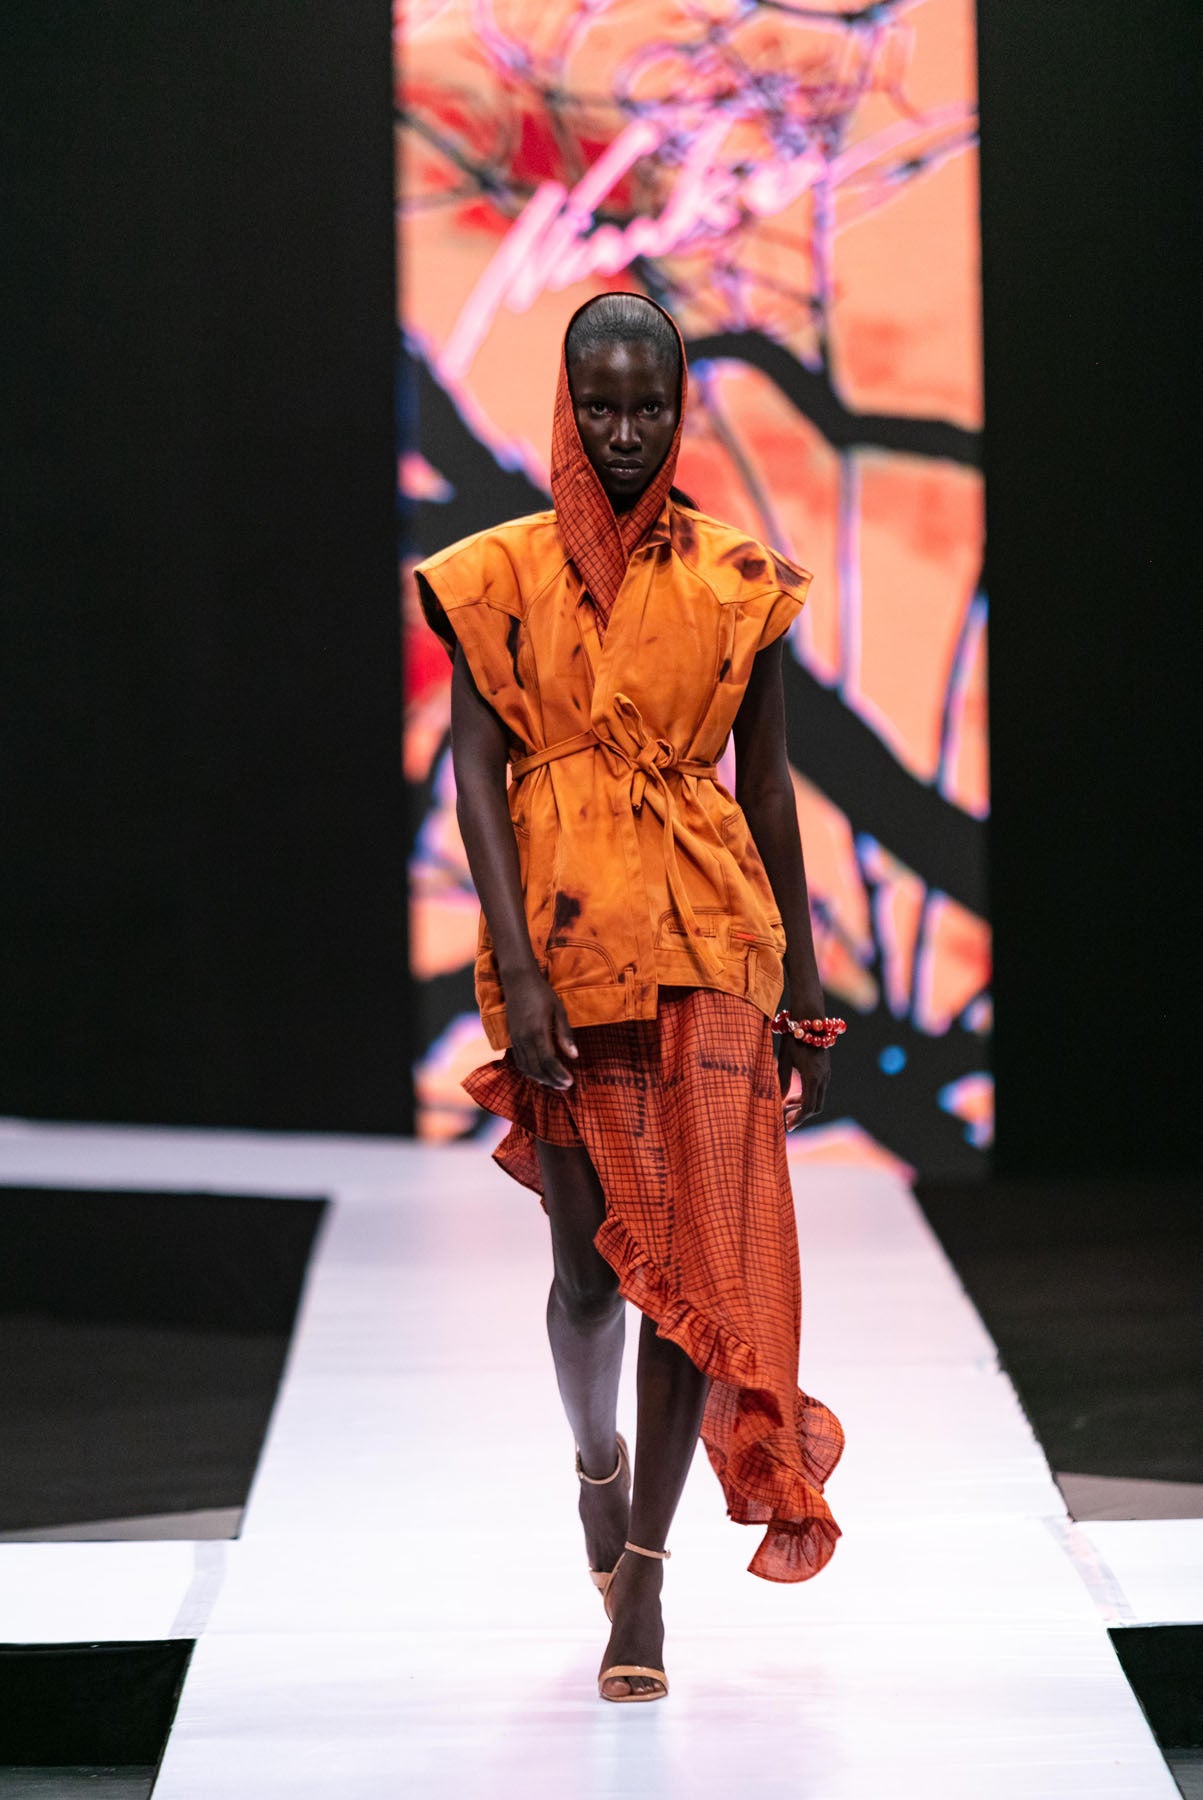 Meet the Mauritanian Fashion Brand Driven By Artisanship, Heritage and ...